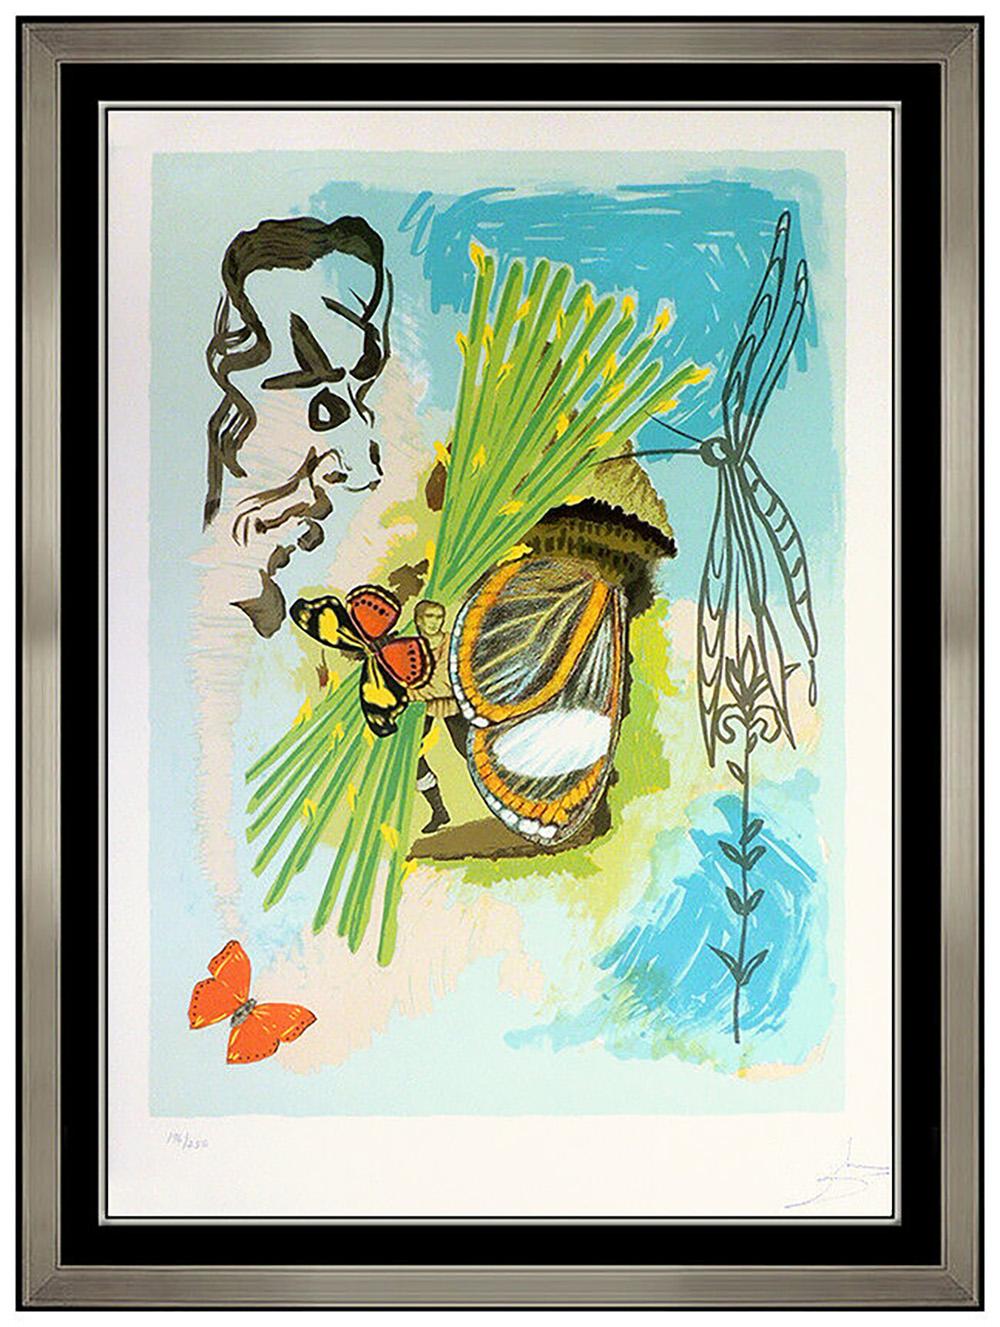 Salvador Dalí Animal Print - Salvador Dali Hand Signed Color Lithograph The Overseer Ivanhoe Butterfly Art